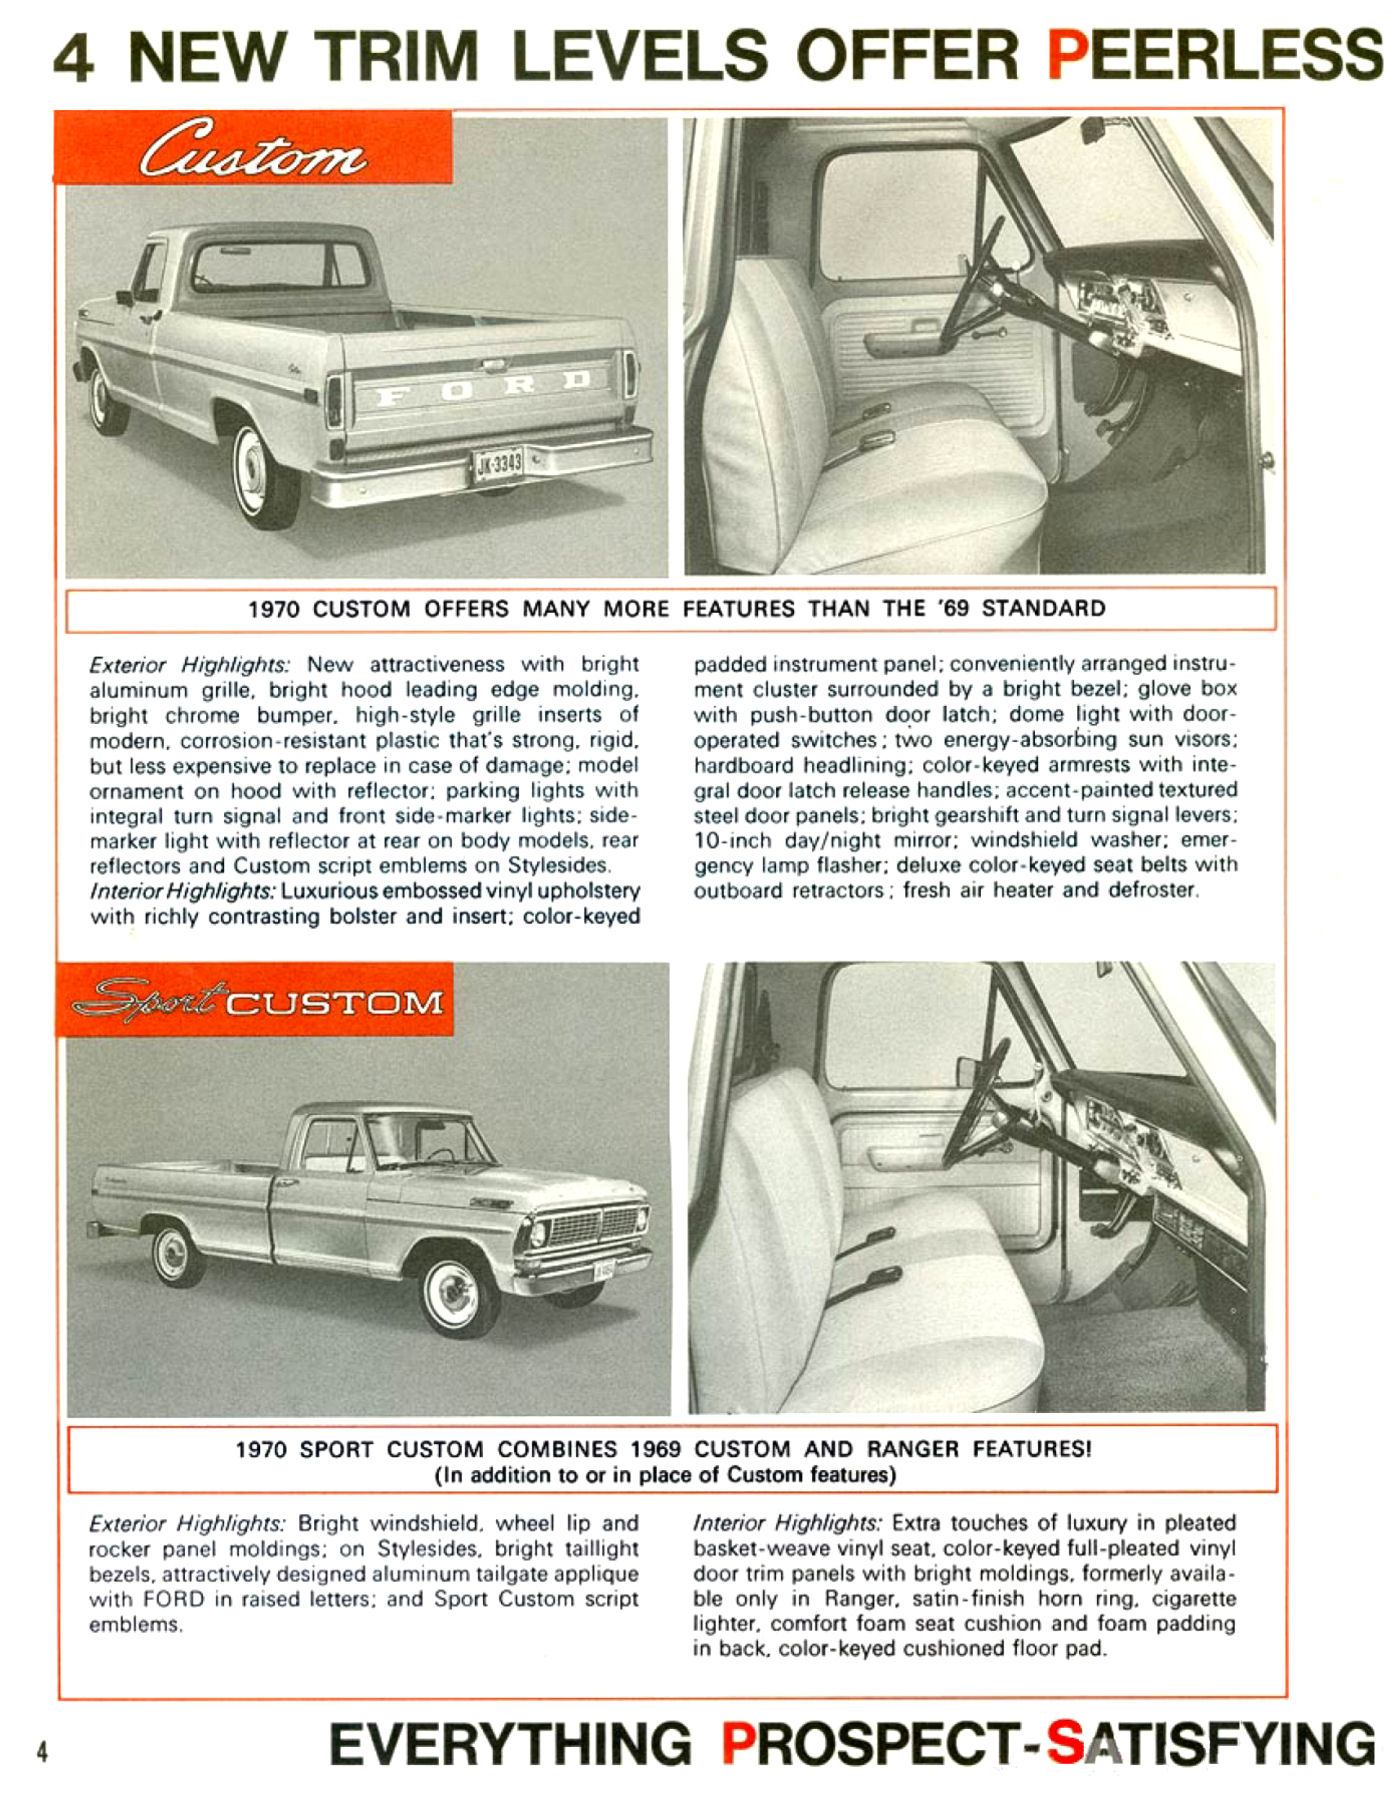 1970 Ford Light Truck Sales Features-04